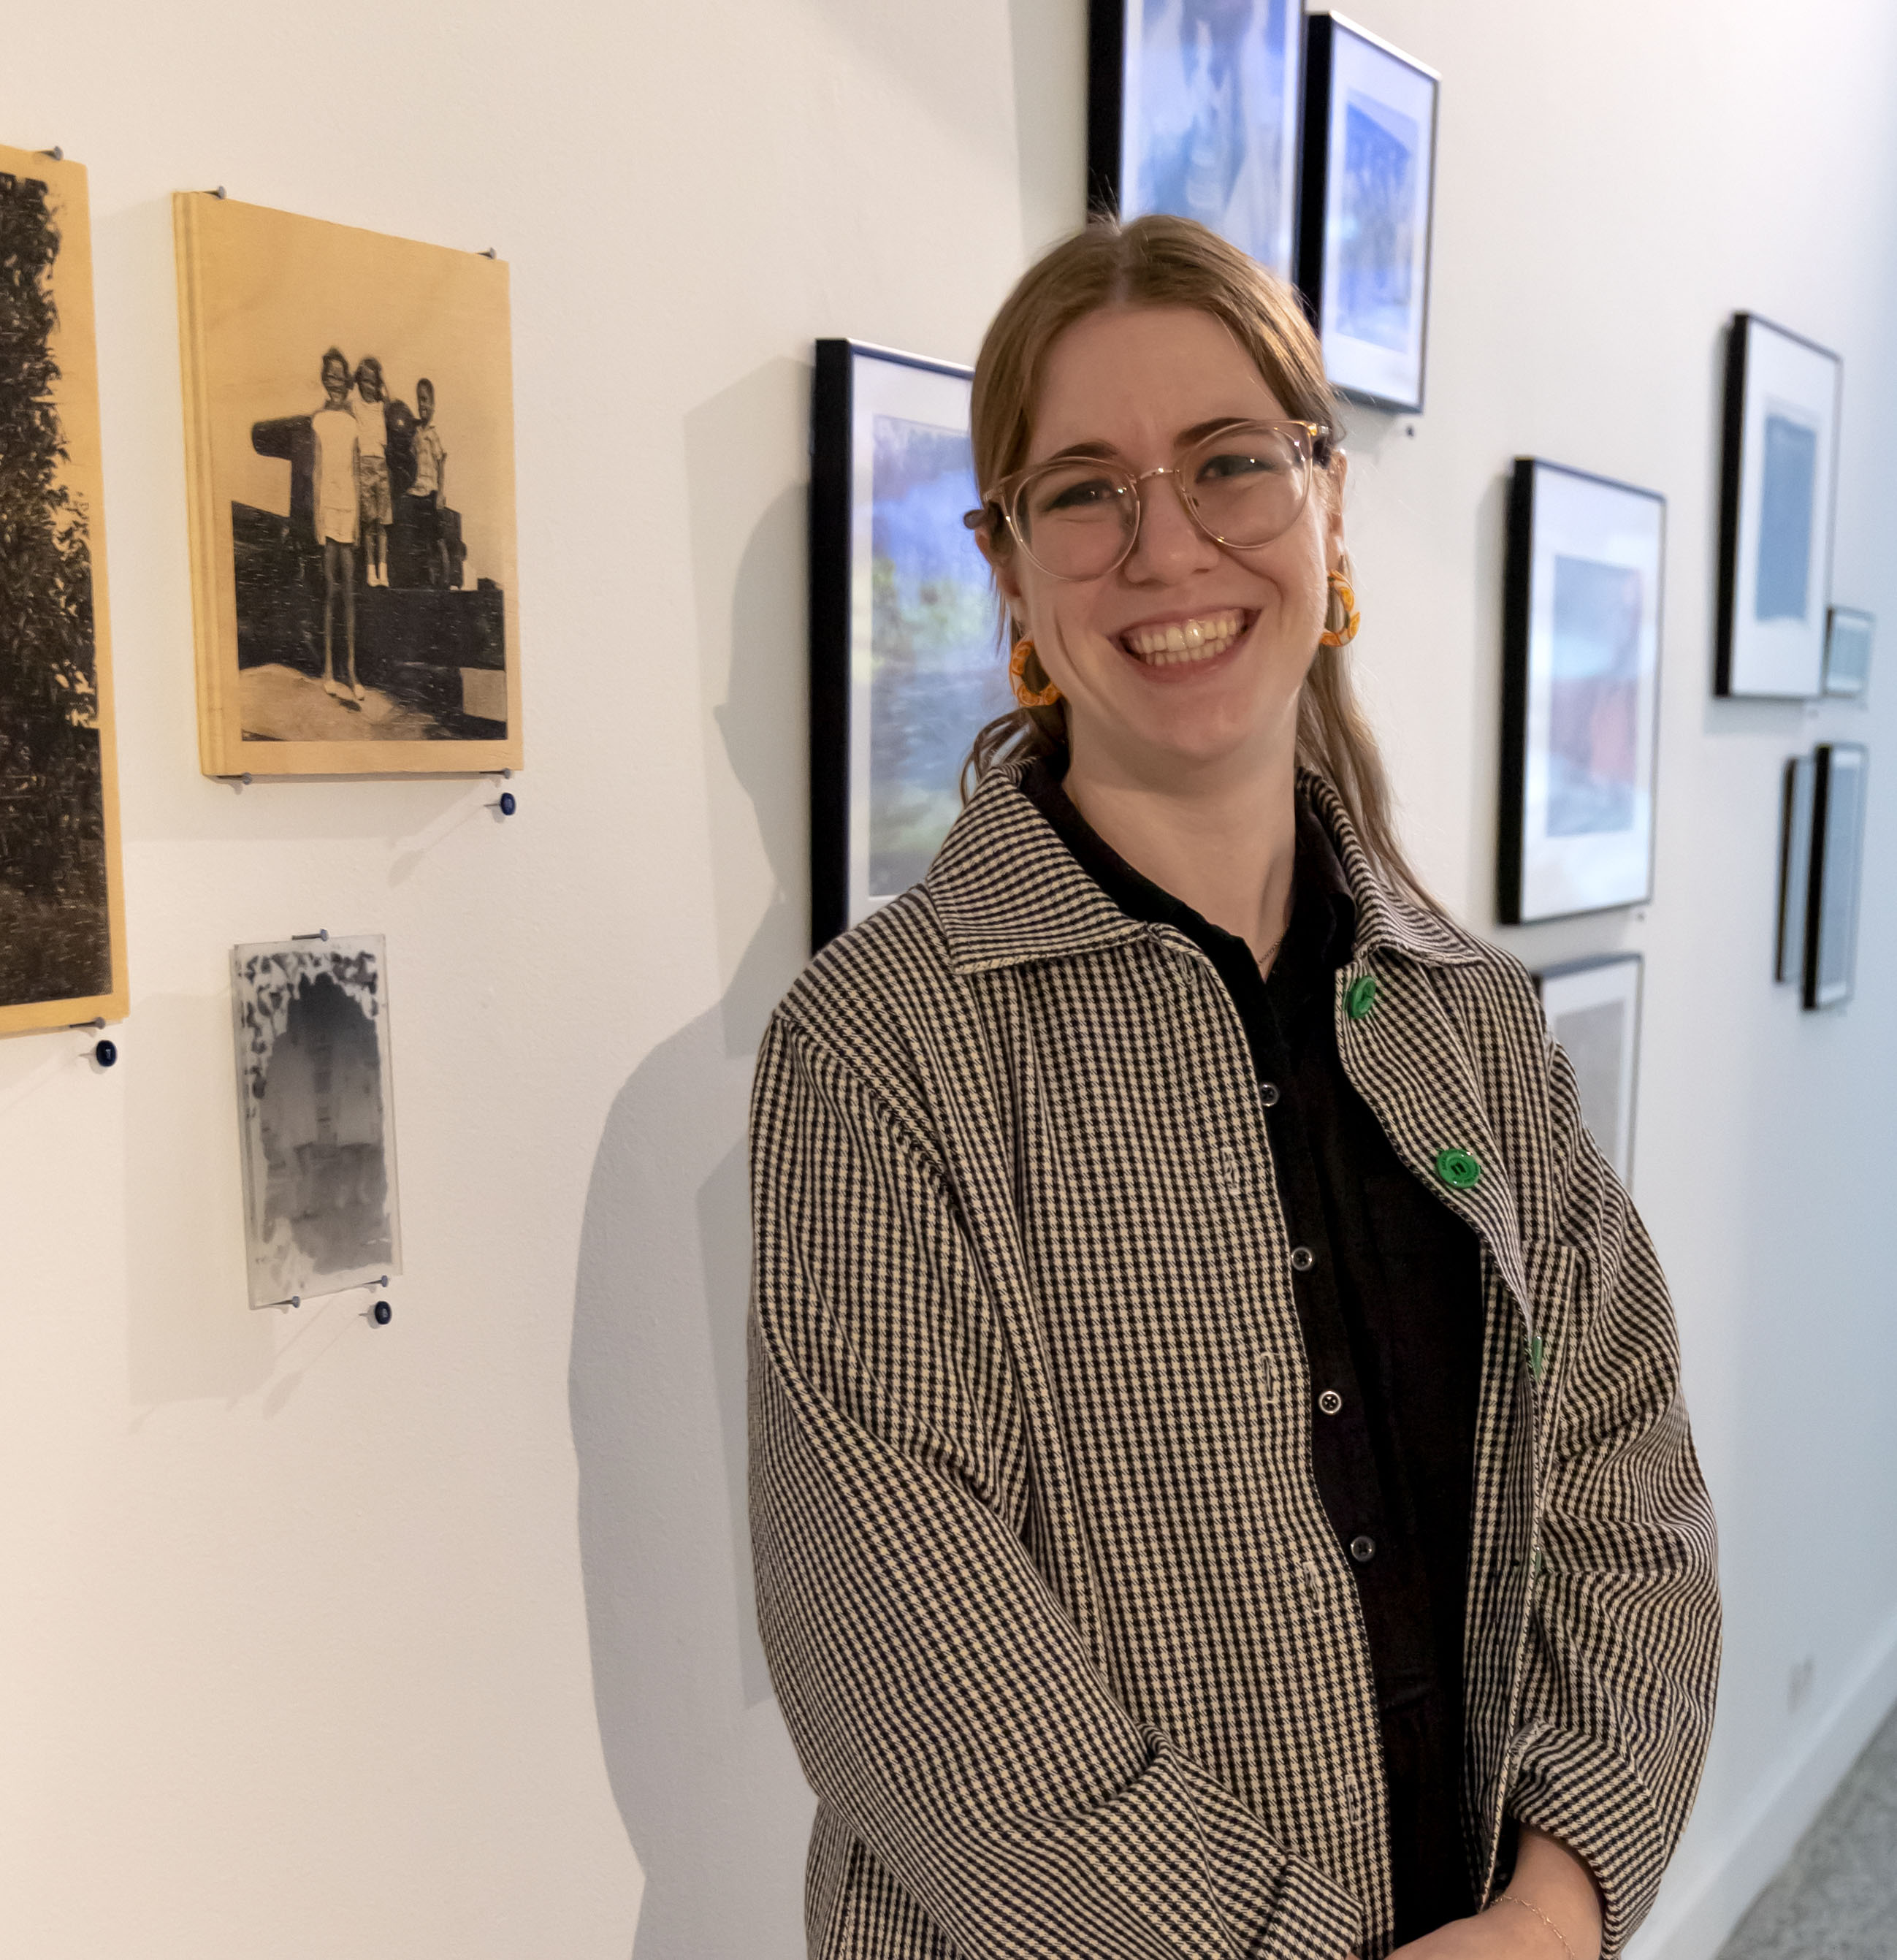 Photograph of Elizabeth Kelly standing in front of her artwork in a gallery